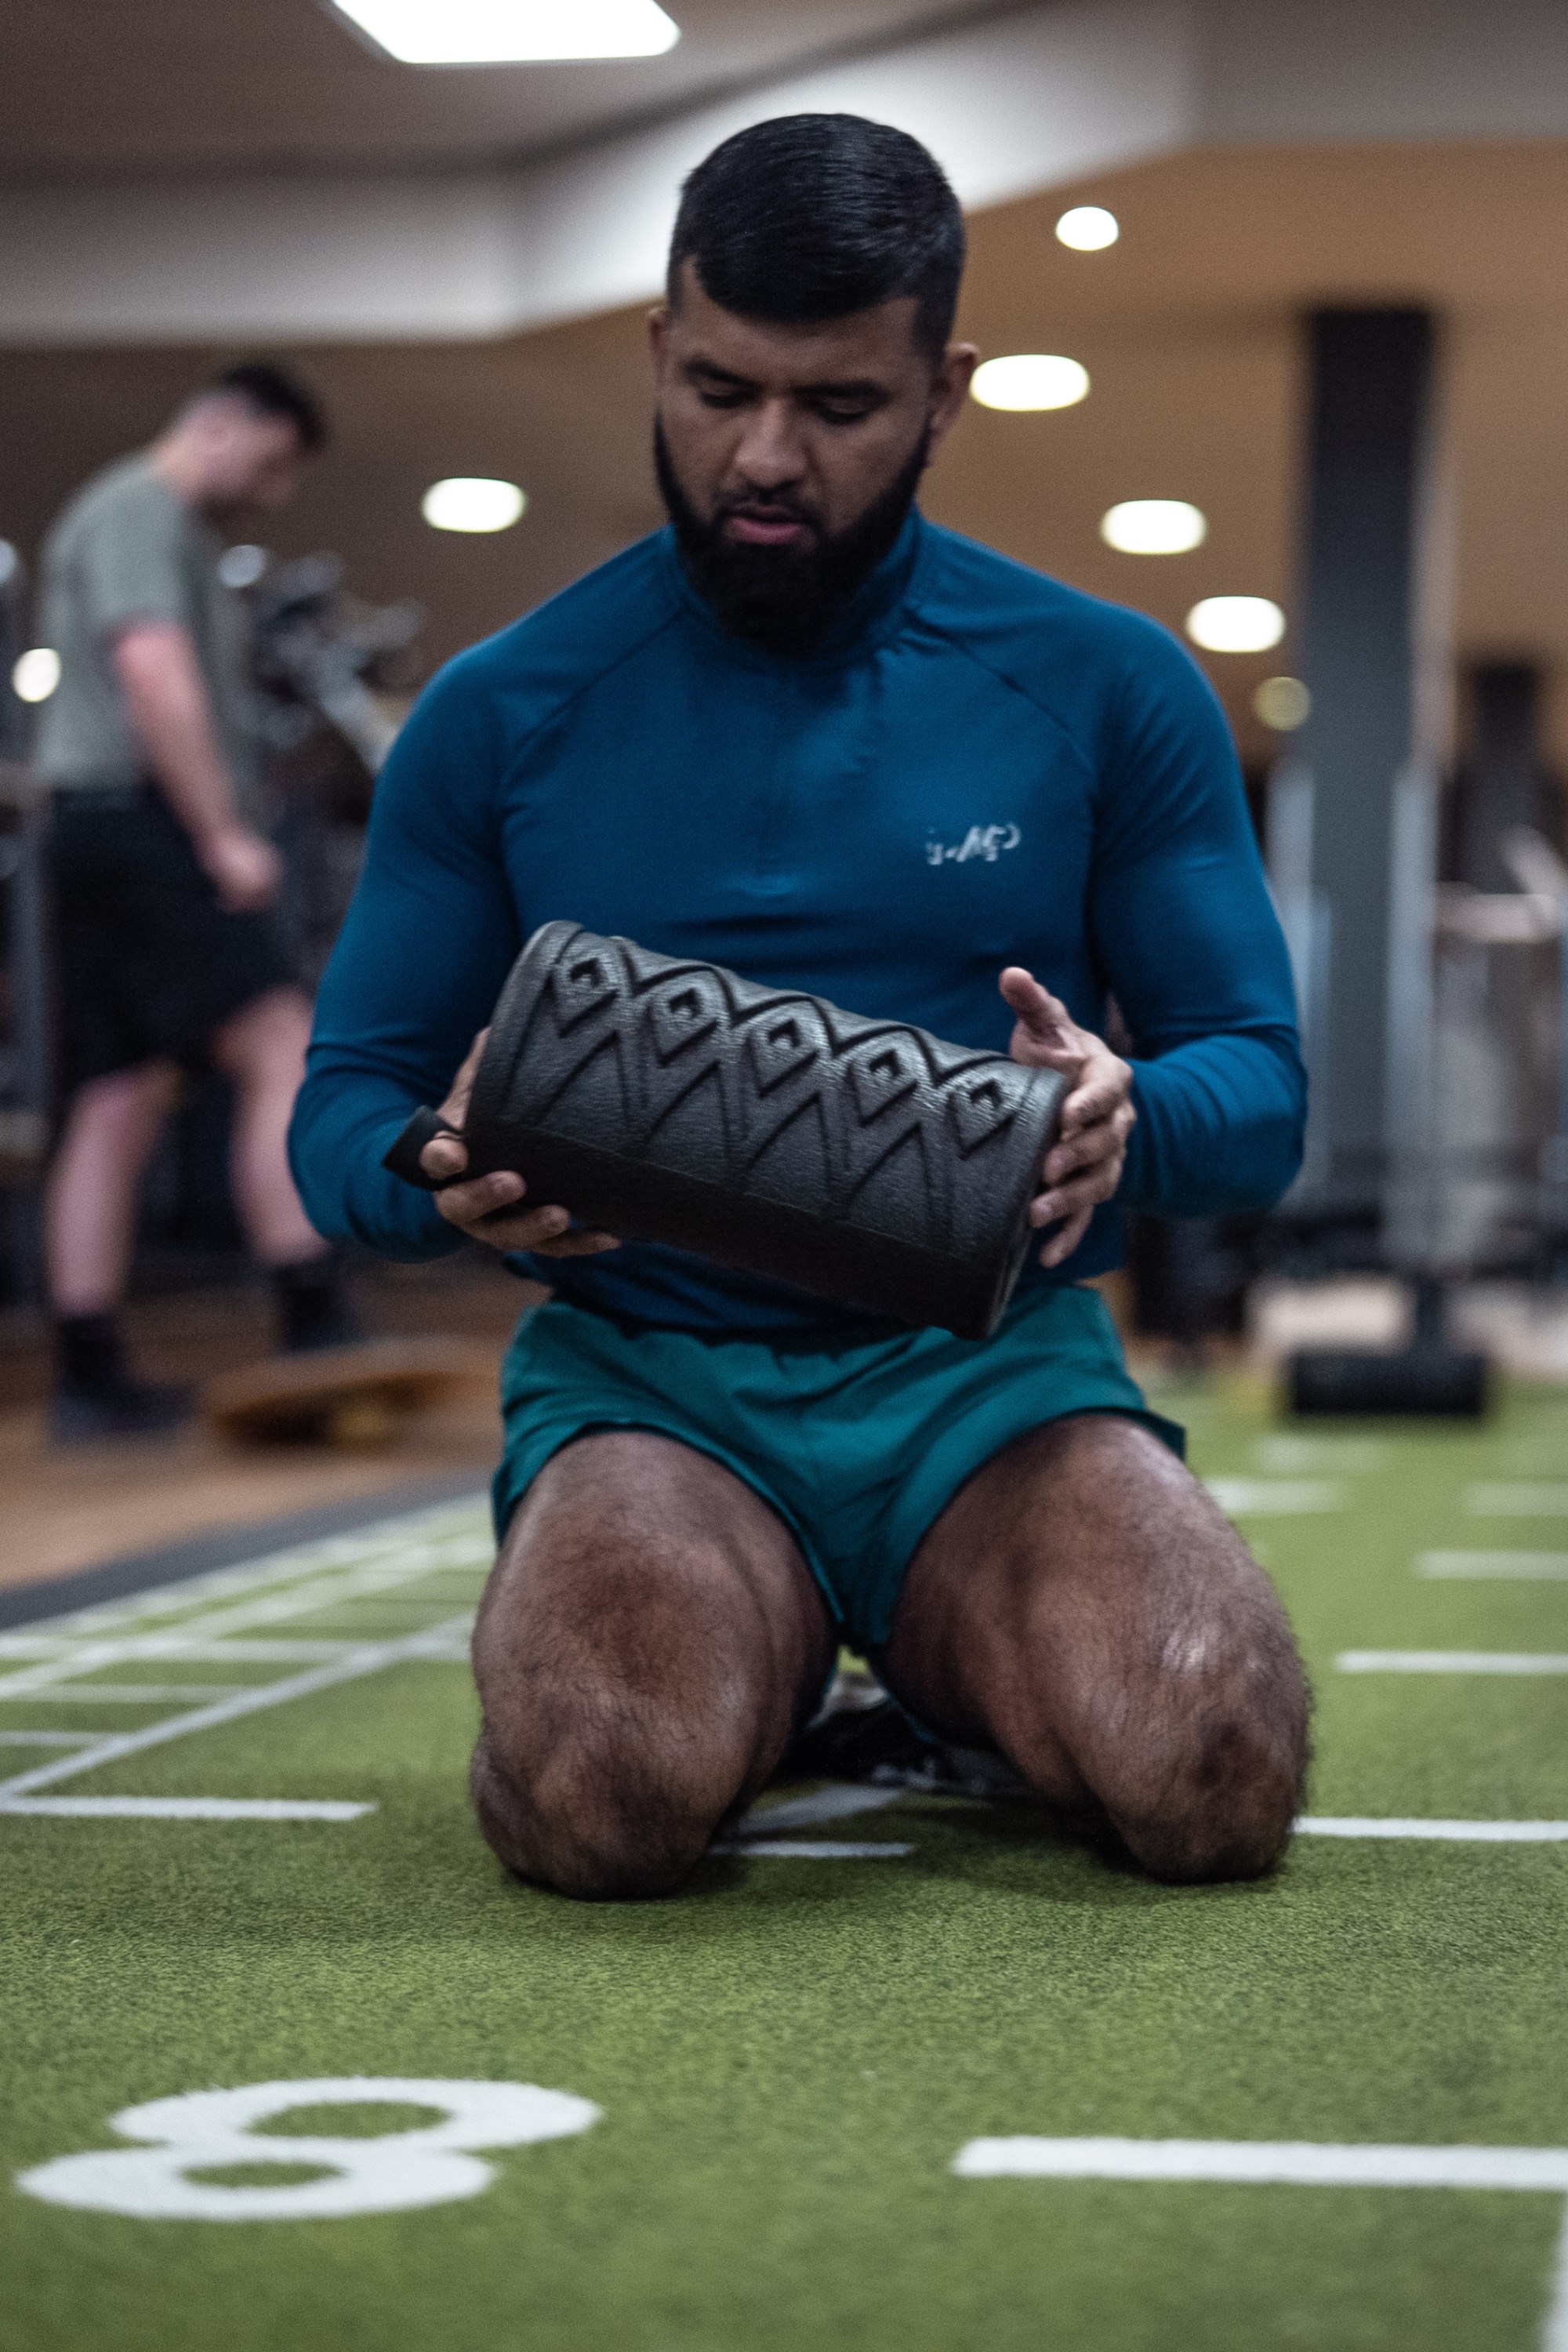 Foam Roller Triceps Exercises to Aid Recovery – Pulseroll